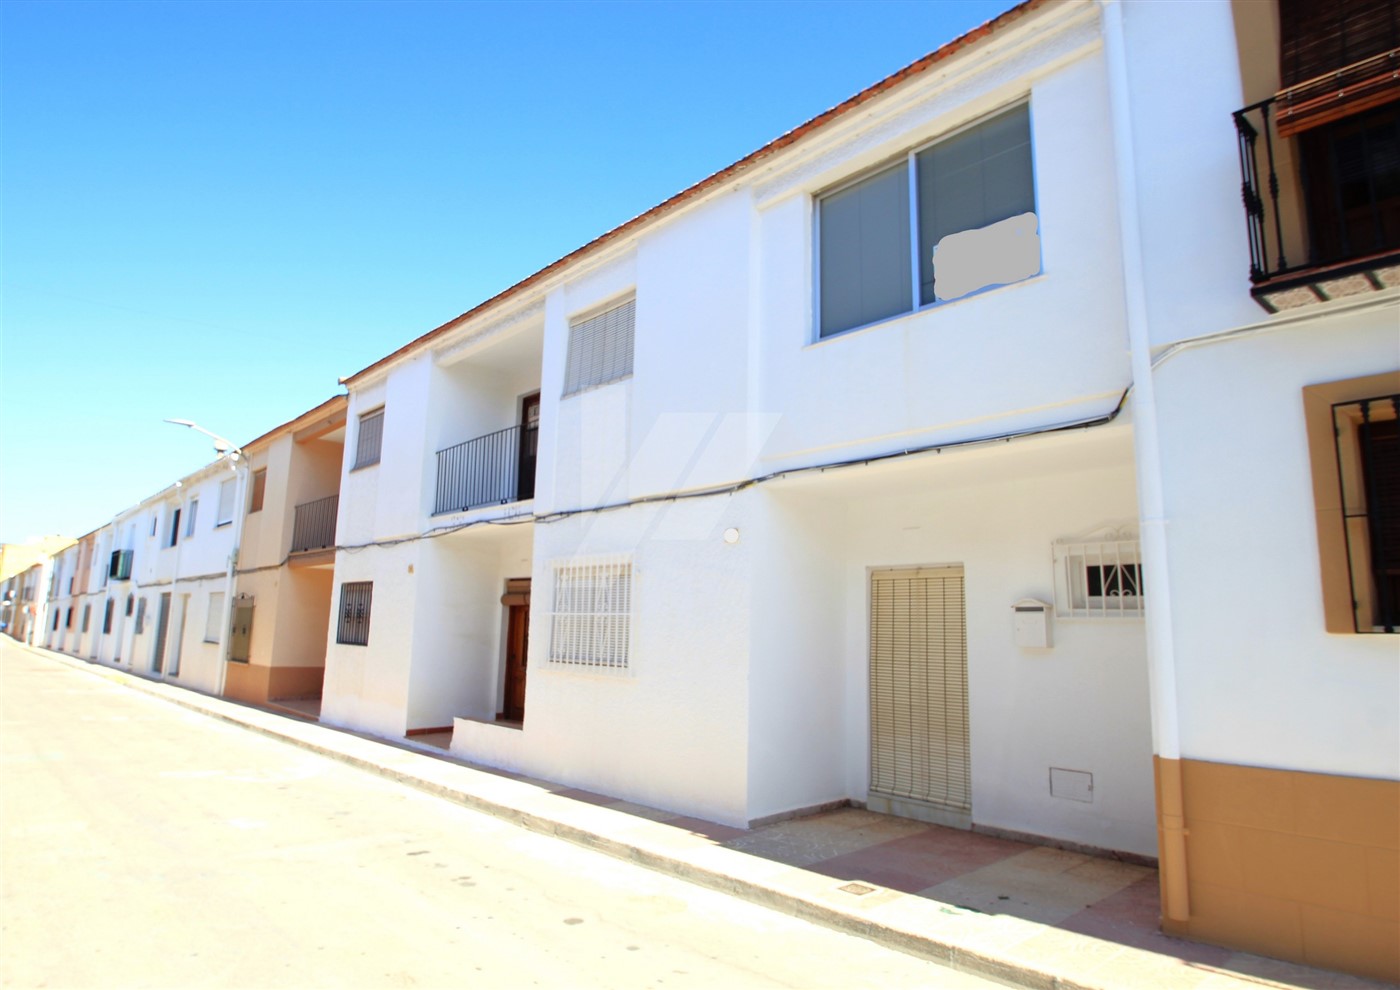 Townhouse for sale in Teulada, Costa Blanca.